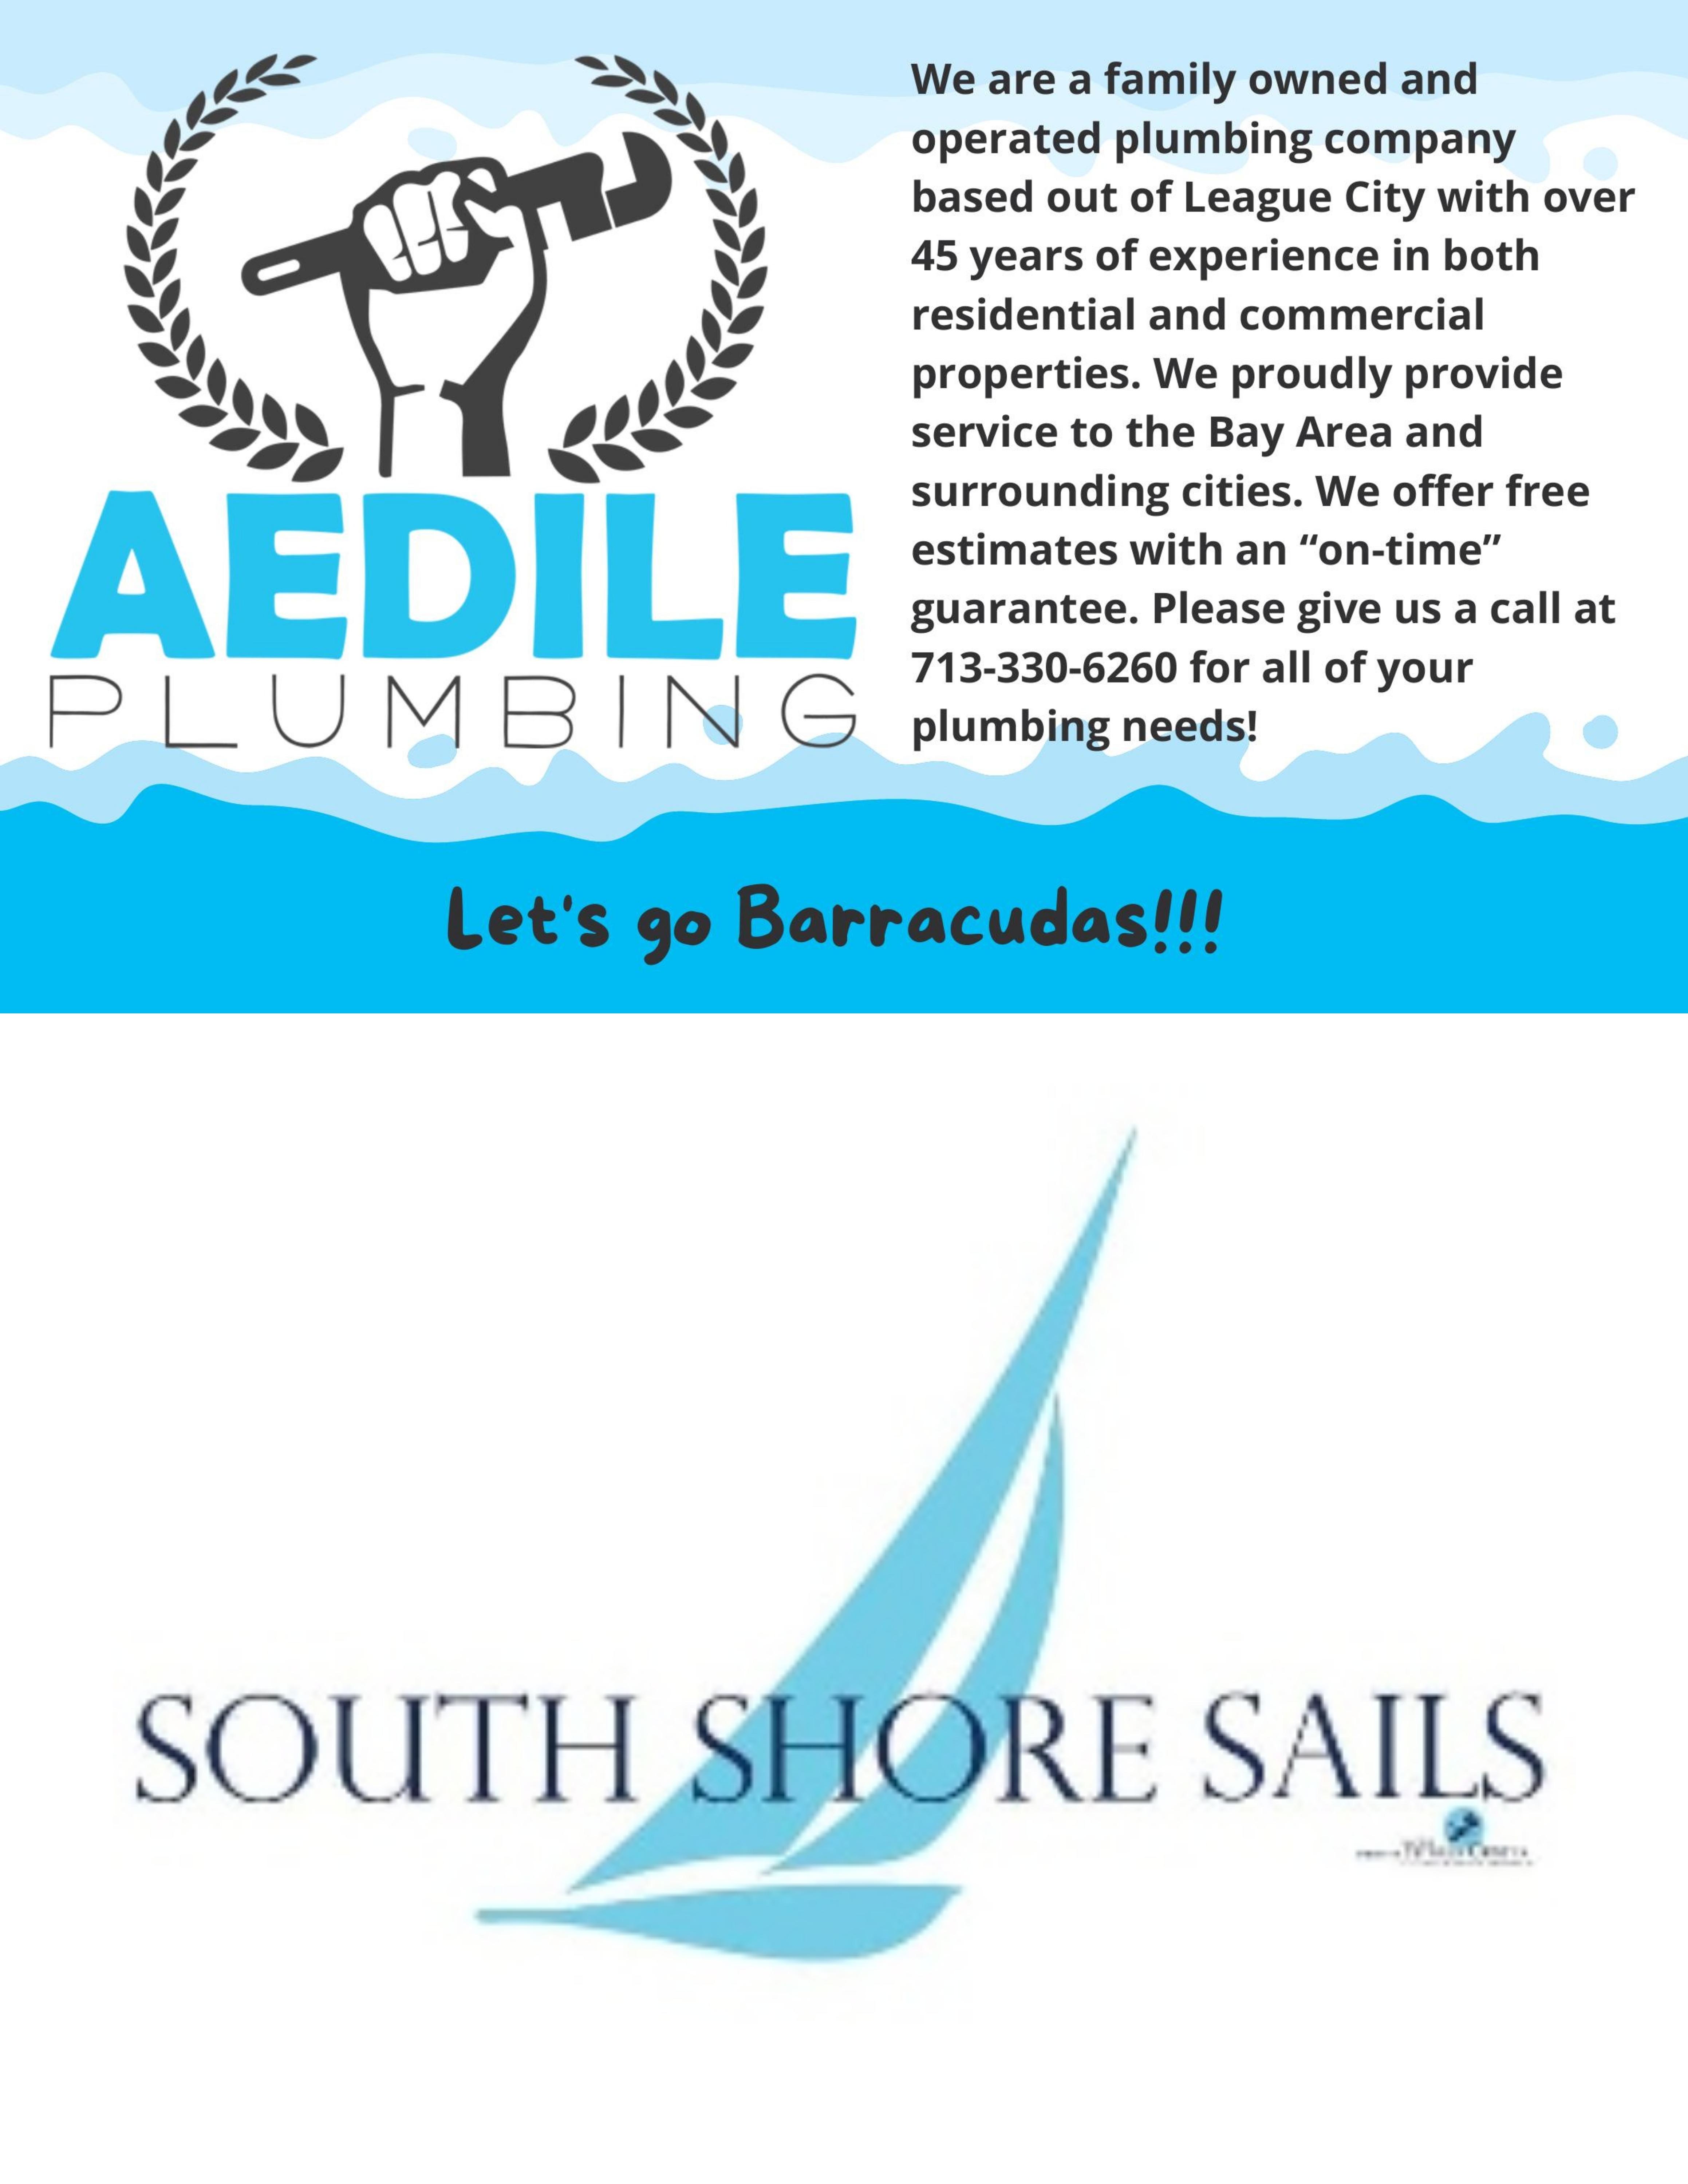 South Shore Sails and Aedile Plumbing